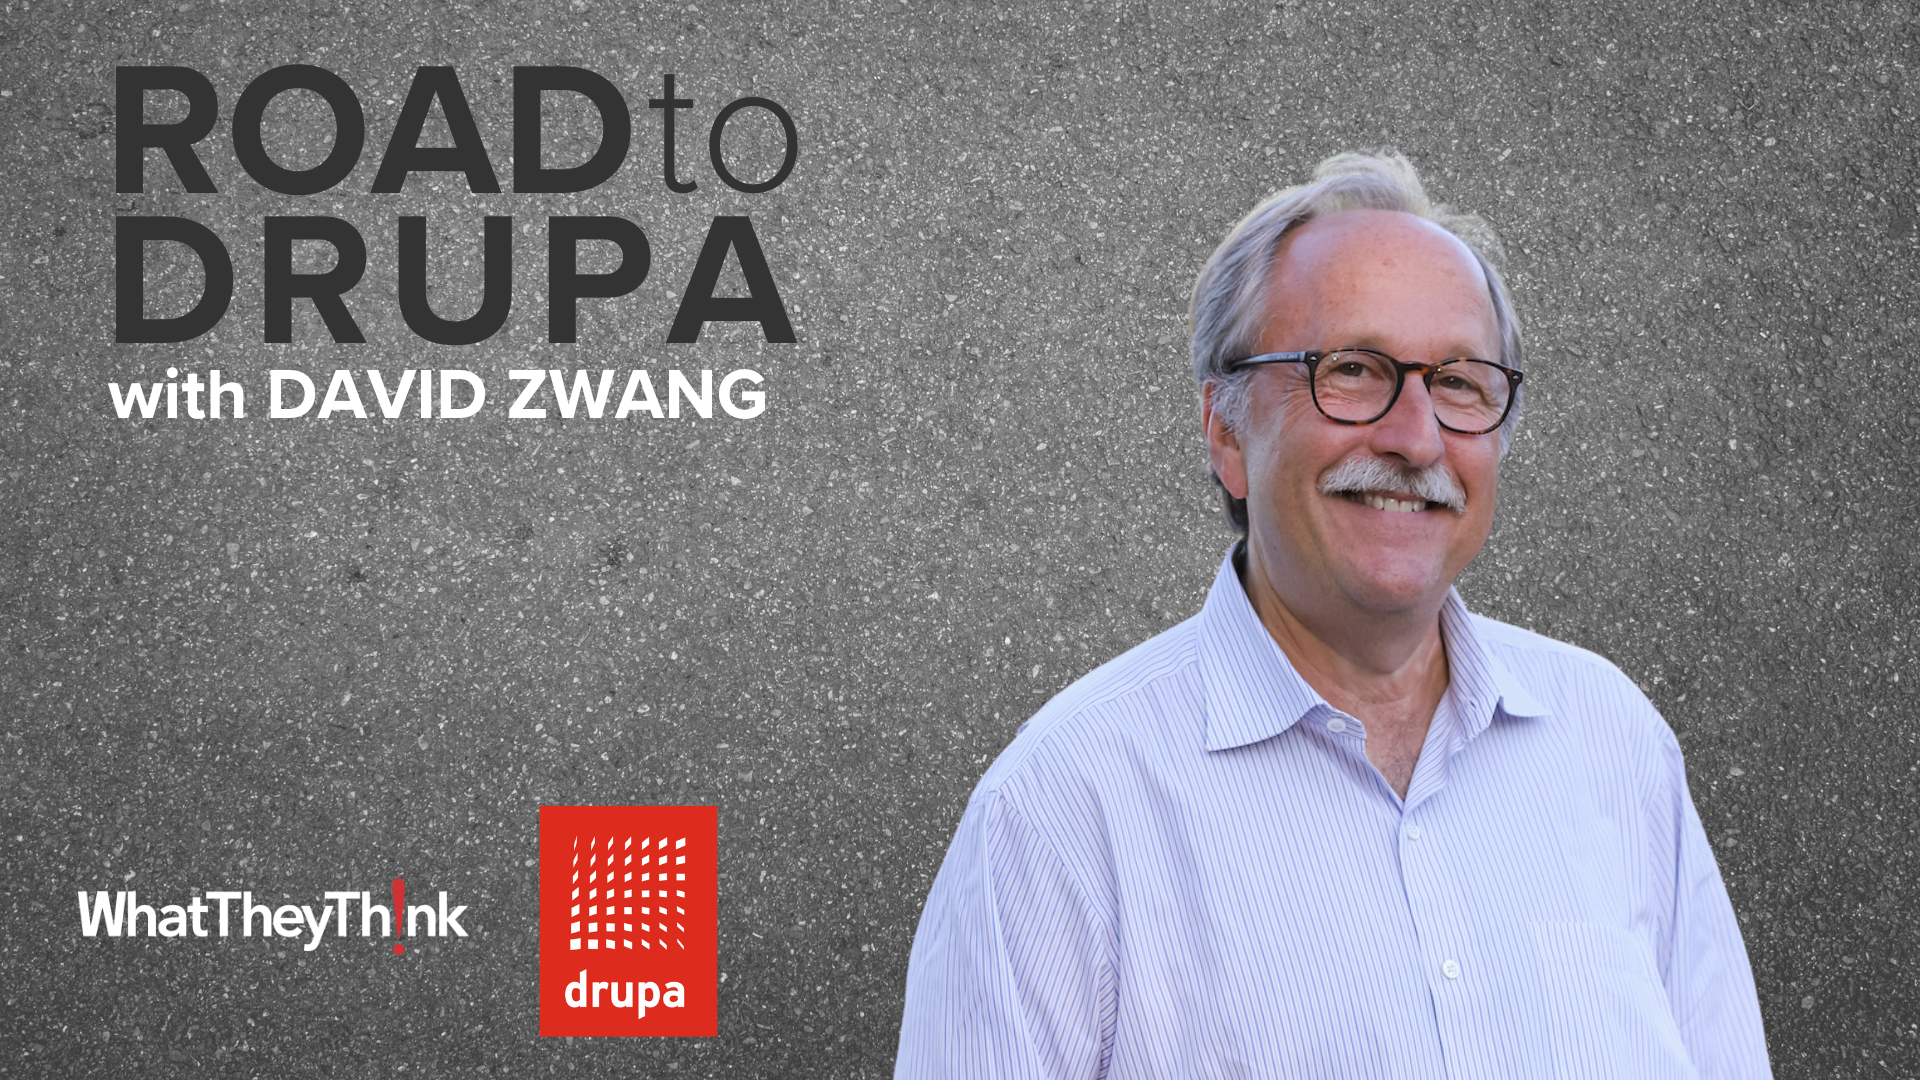 Video preview: David Zwang On the Road to drupa